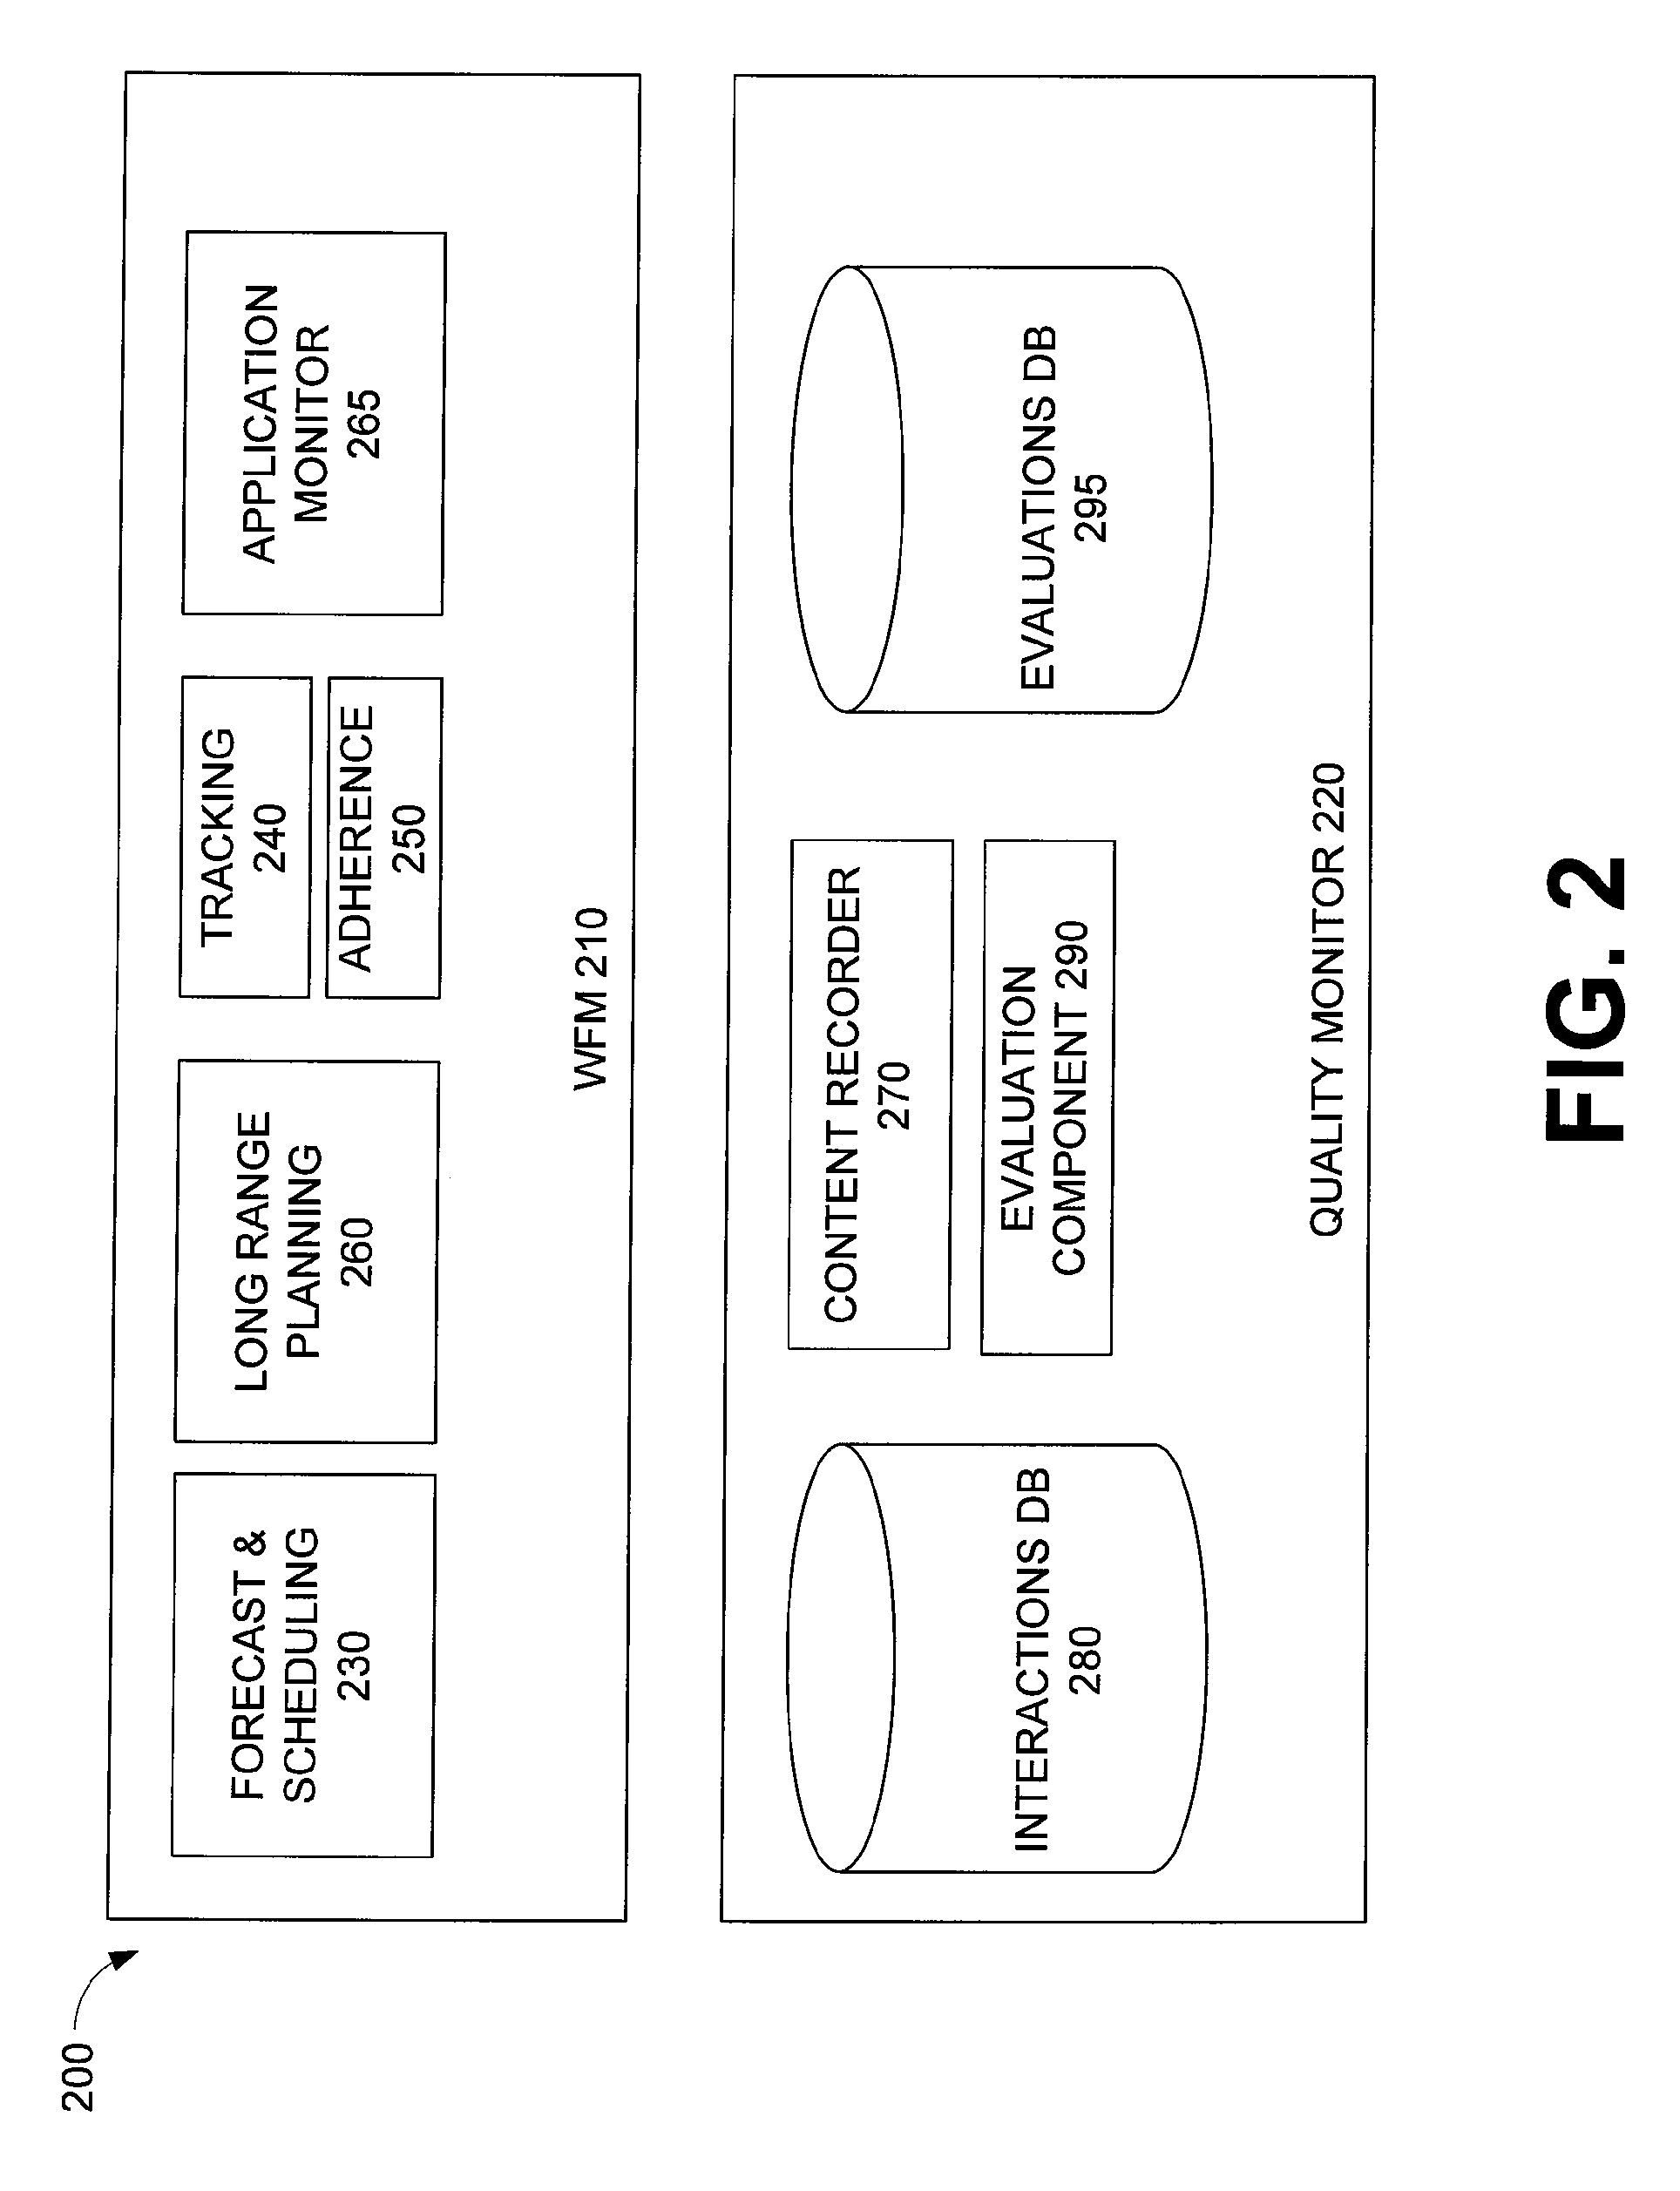 System and Method for Integrated Workforce and Quality Management